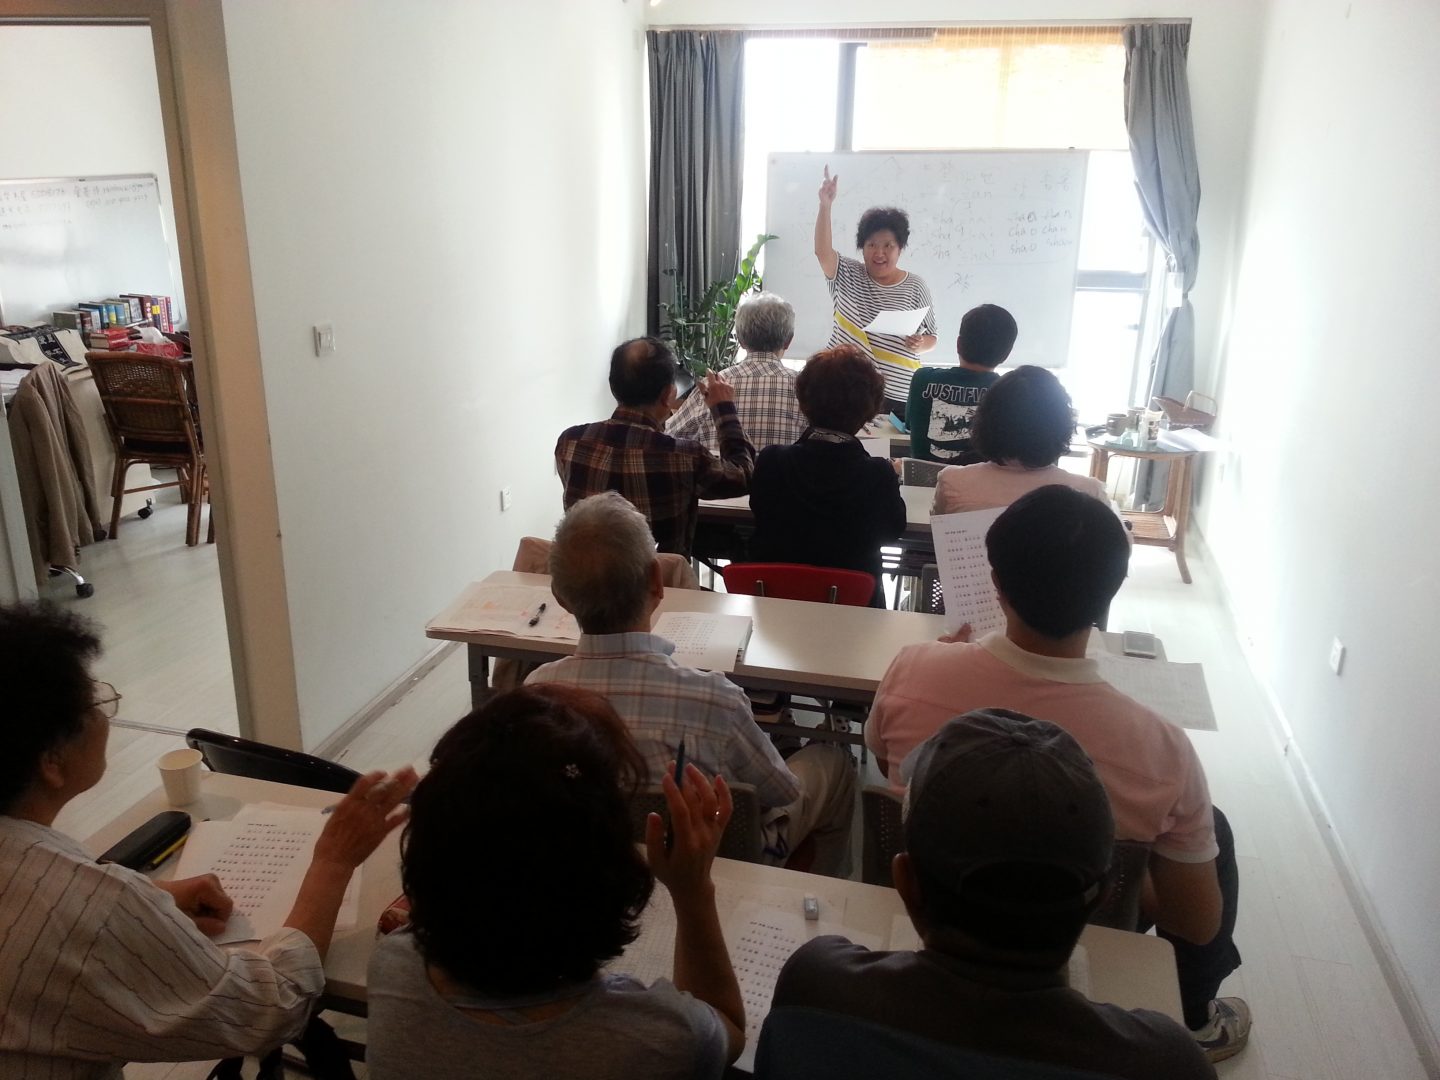 Nan teaching at a Chinese language school in China. Nan and Jung returned to Korea three years ago after 30 years in the mission field and will be officially retiring next year.